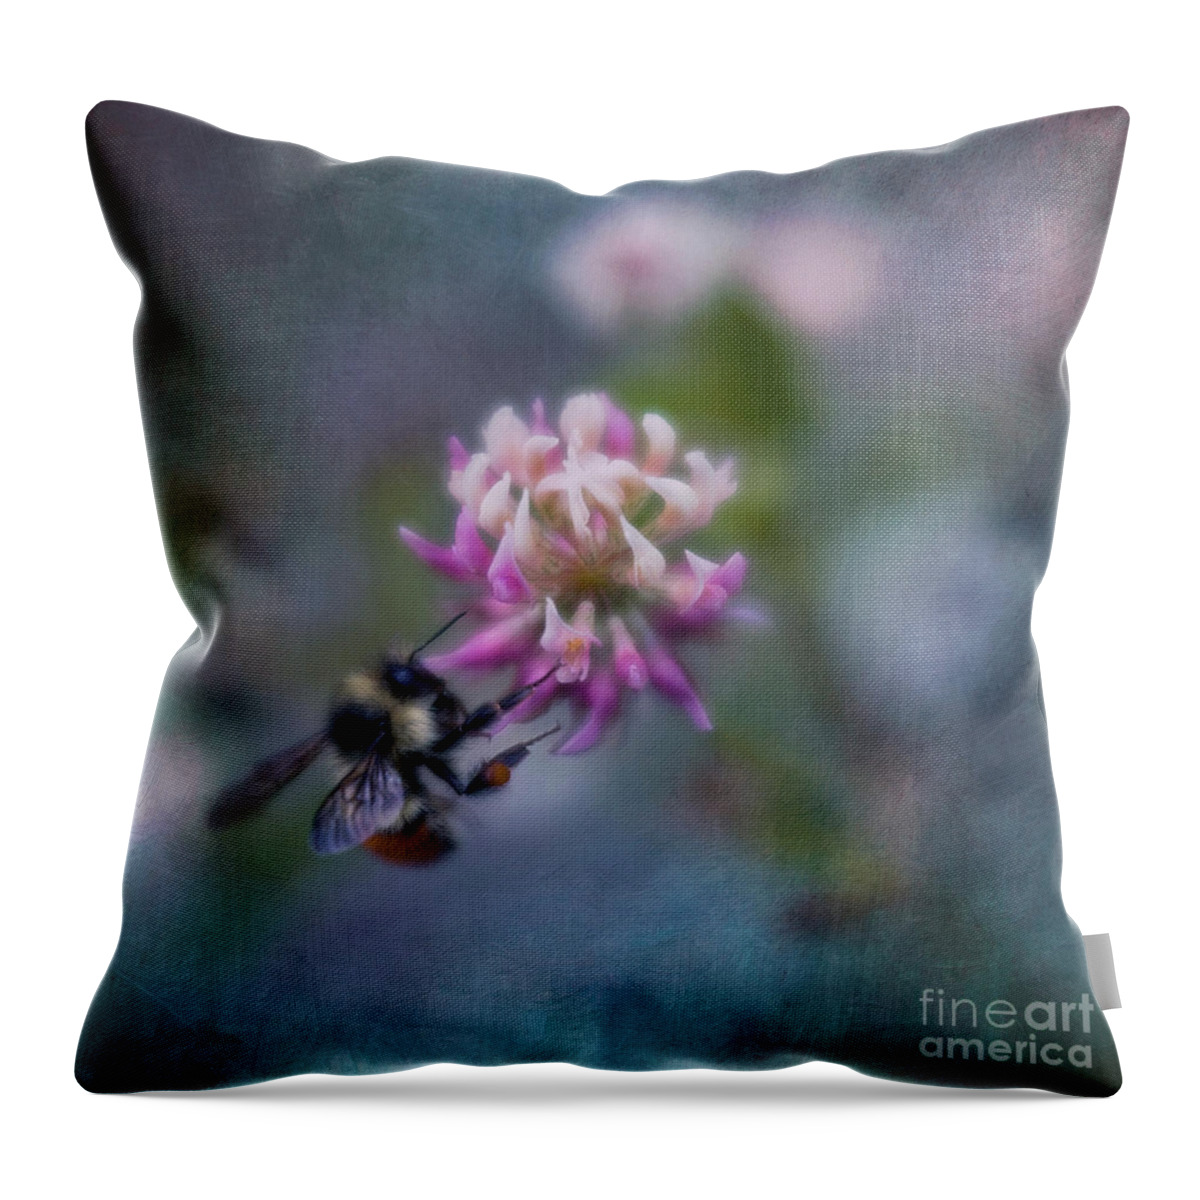 Bumblebee Throw Pillow featuring the photograph Bumblebee on Clover Blossom by Priska Wettstein